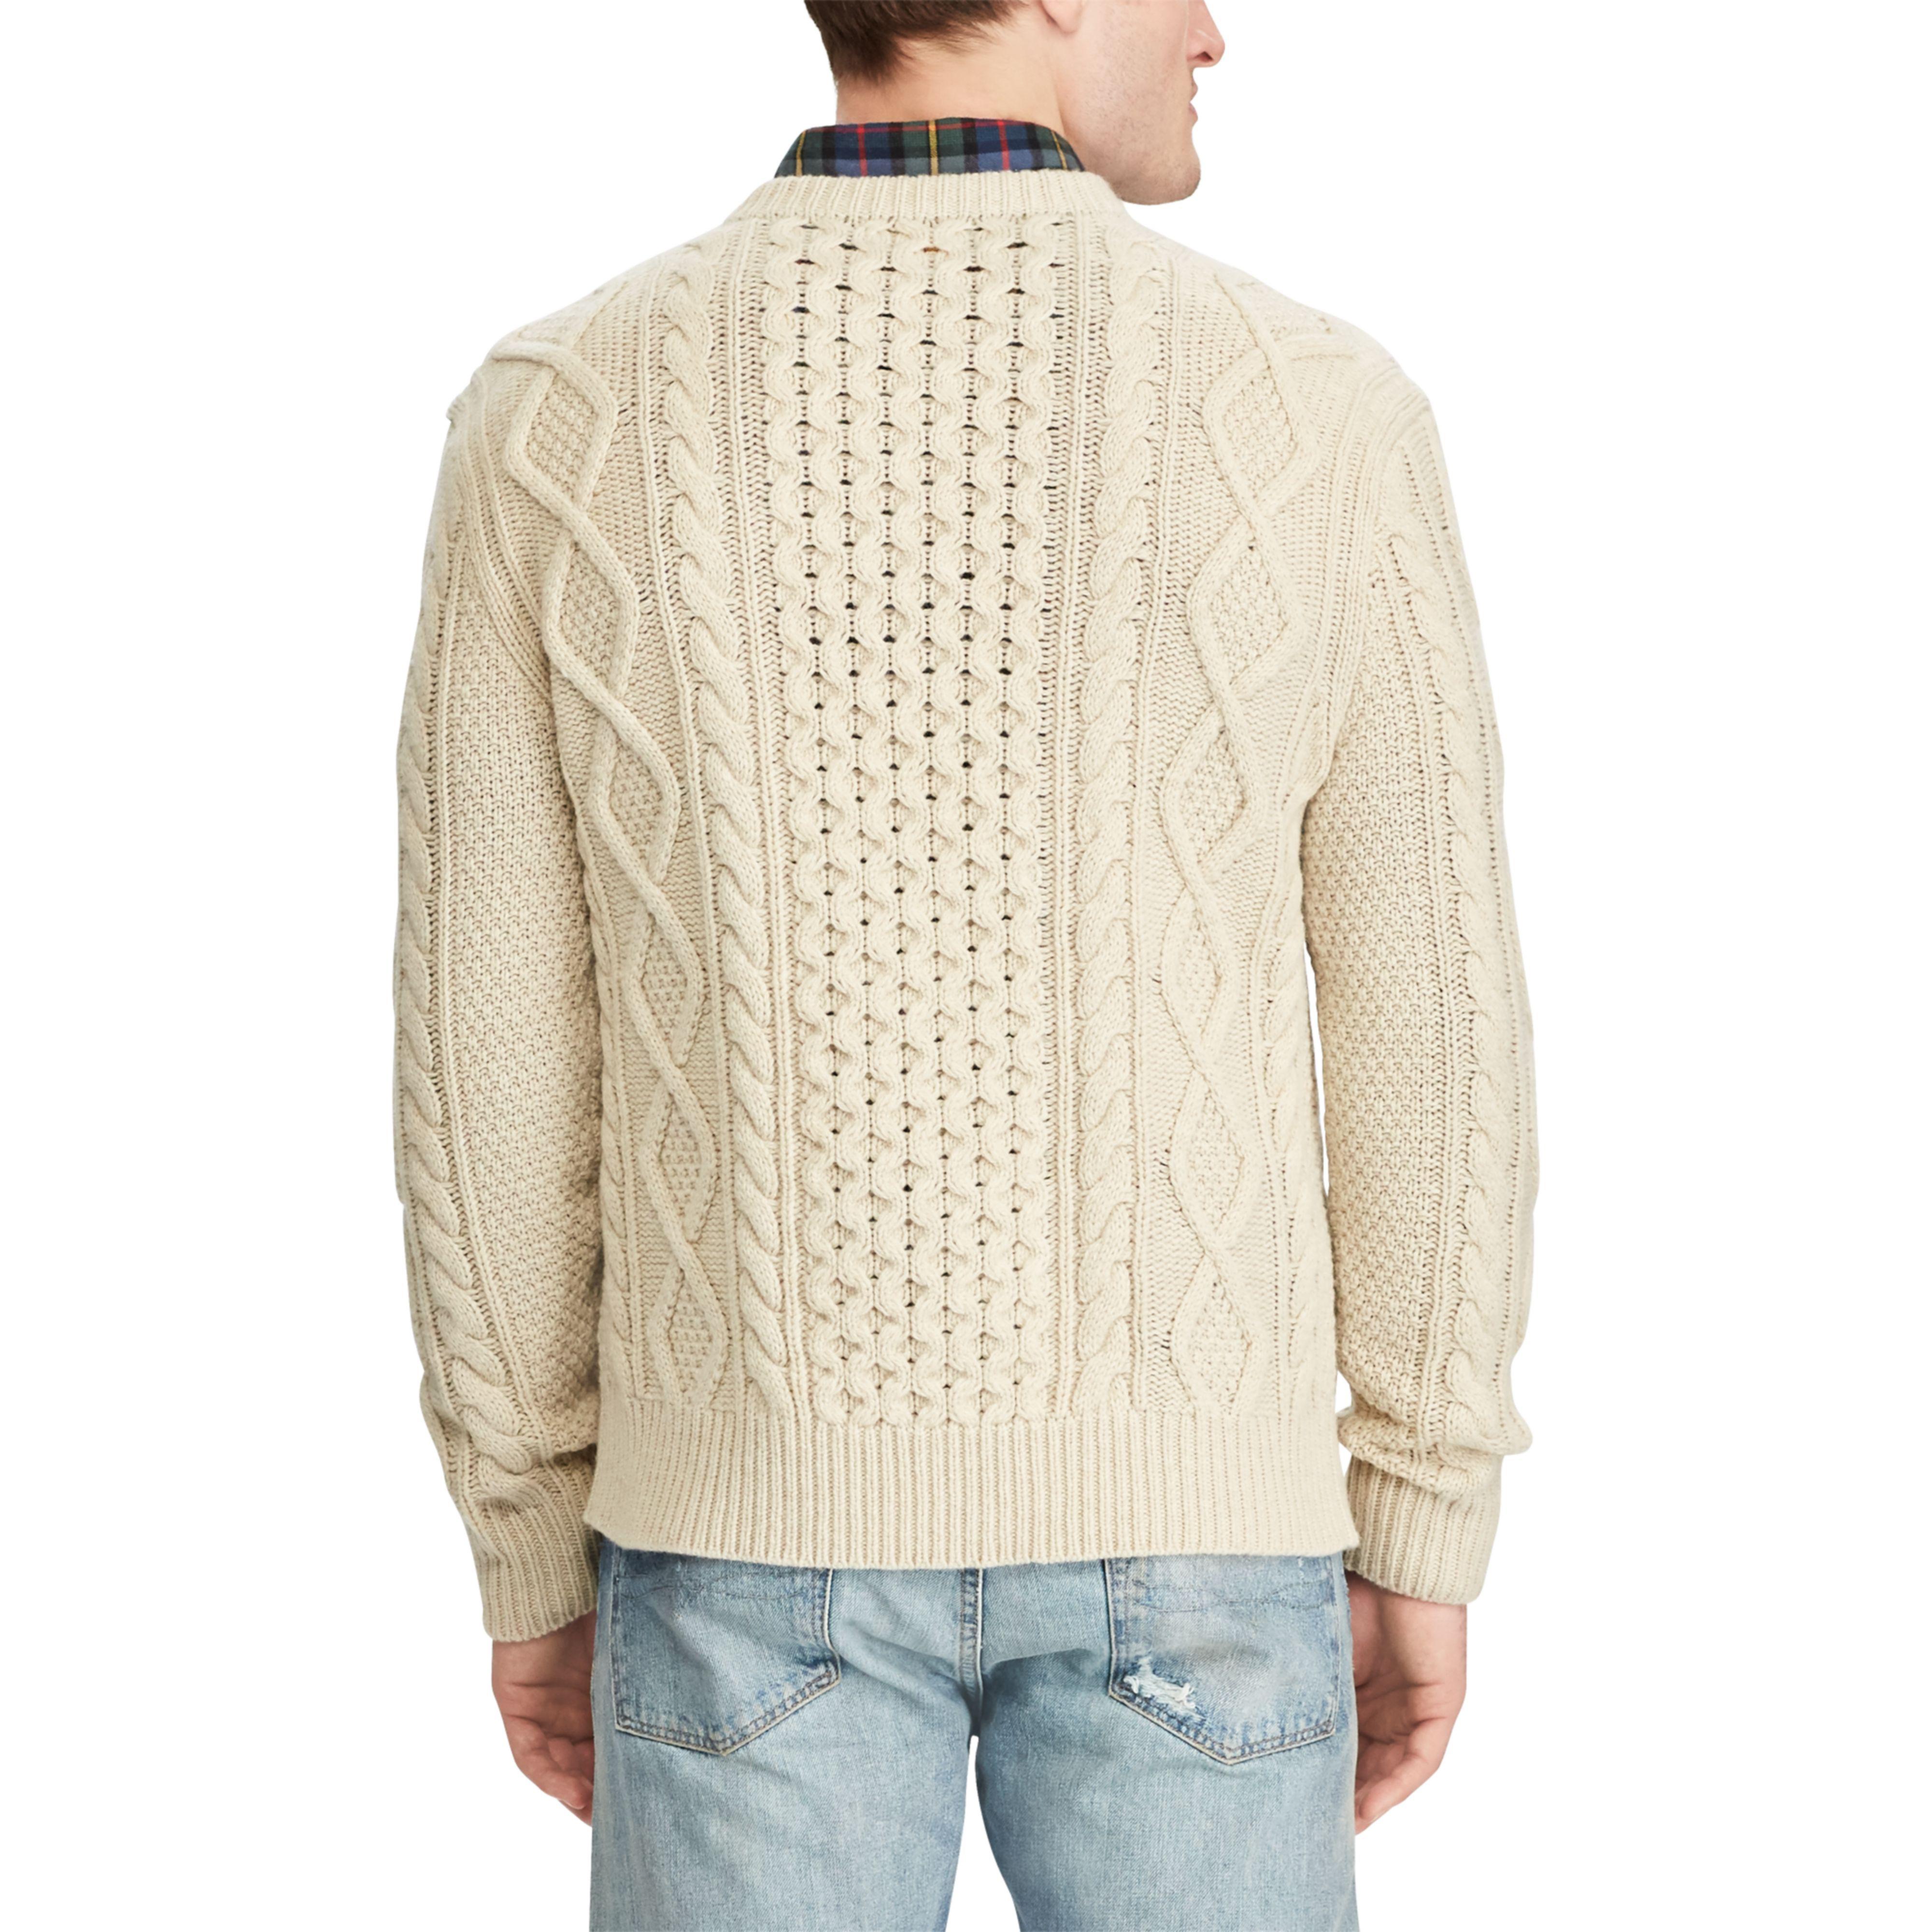 Lyst - Polo Ralph Lauren The Iconic Fisherman's Sweater for Men